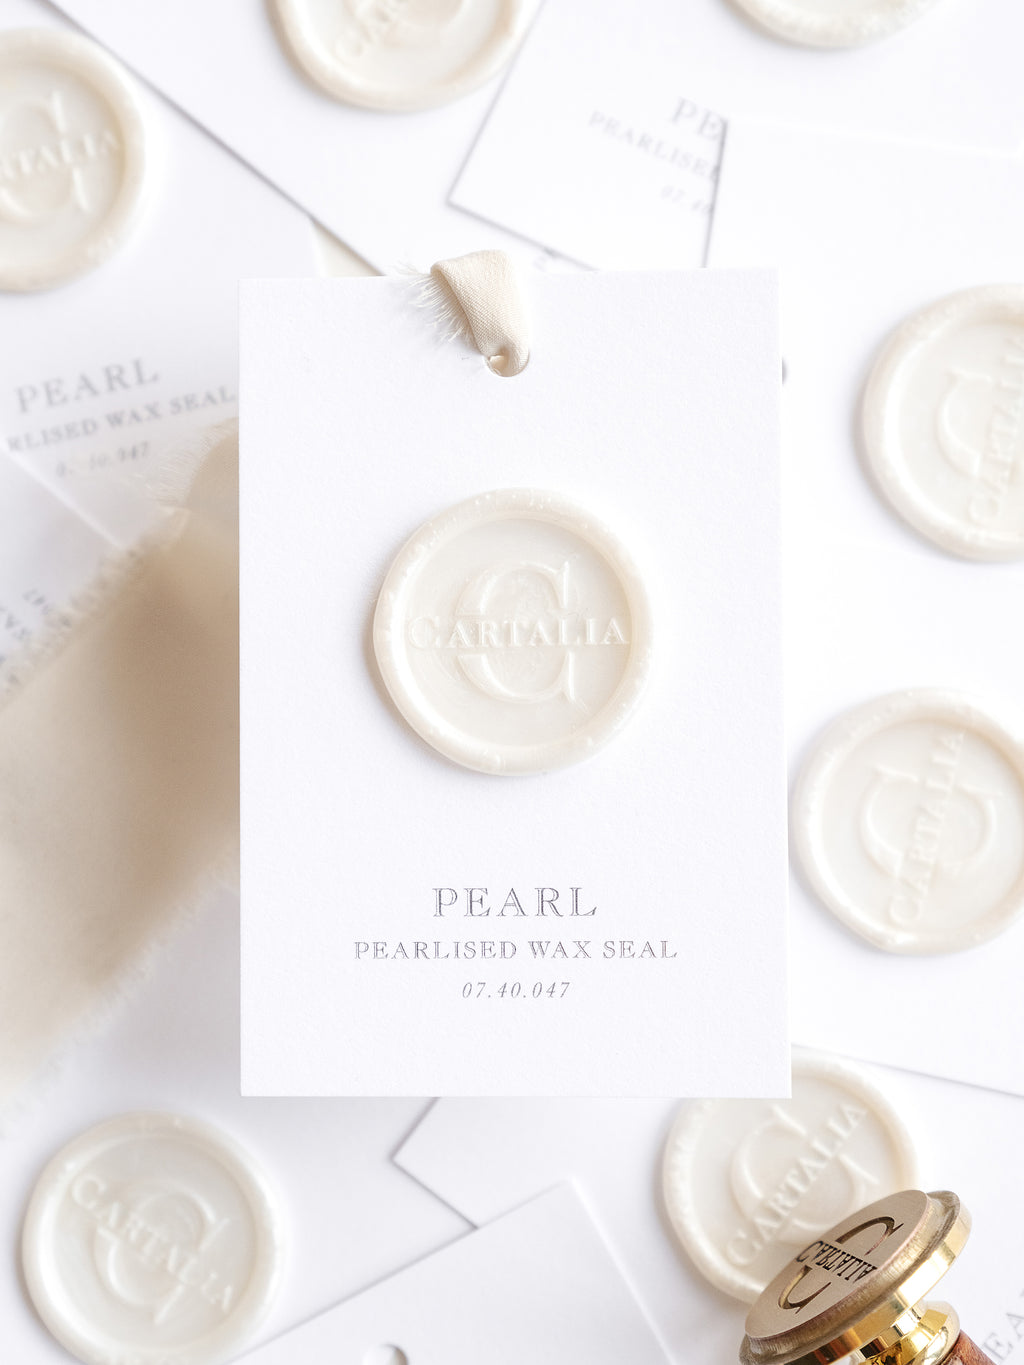 Add-On : Custom Wax Seal in Any font / Motif with Wax Seal Stamp – Cartalia